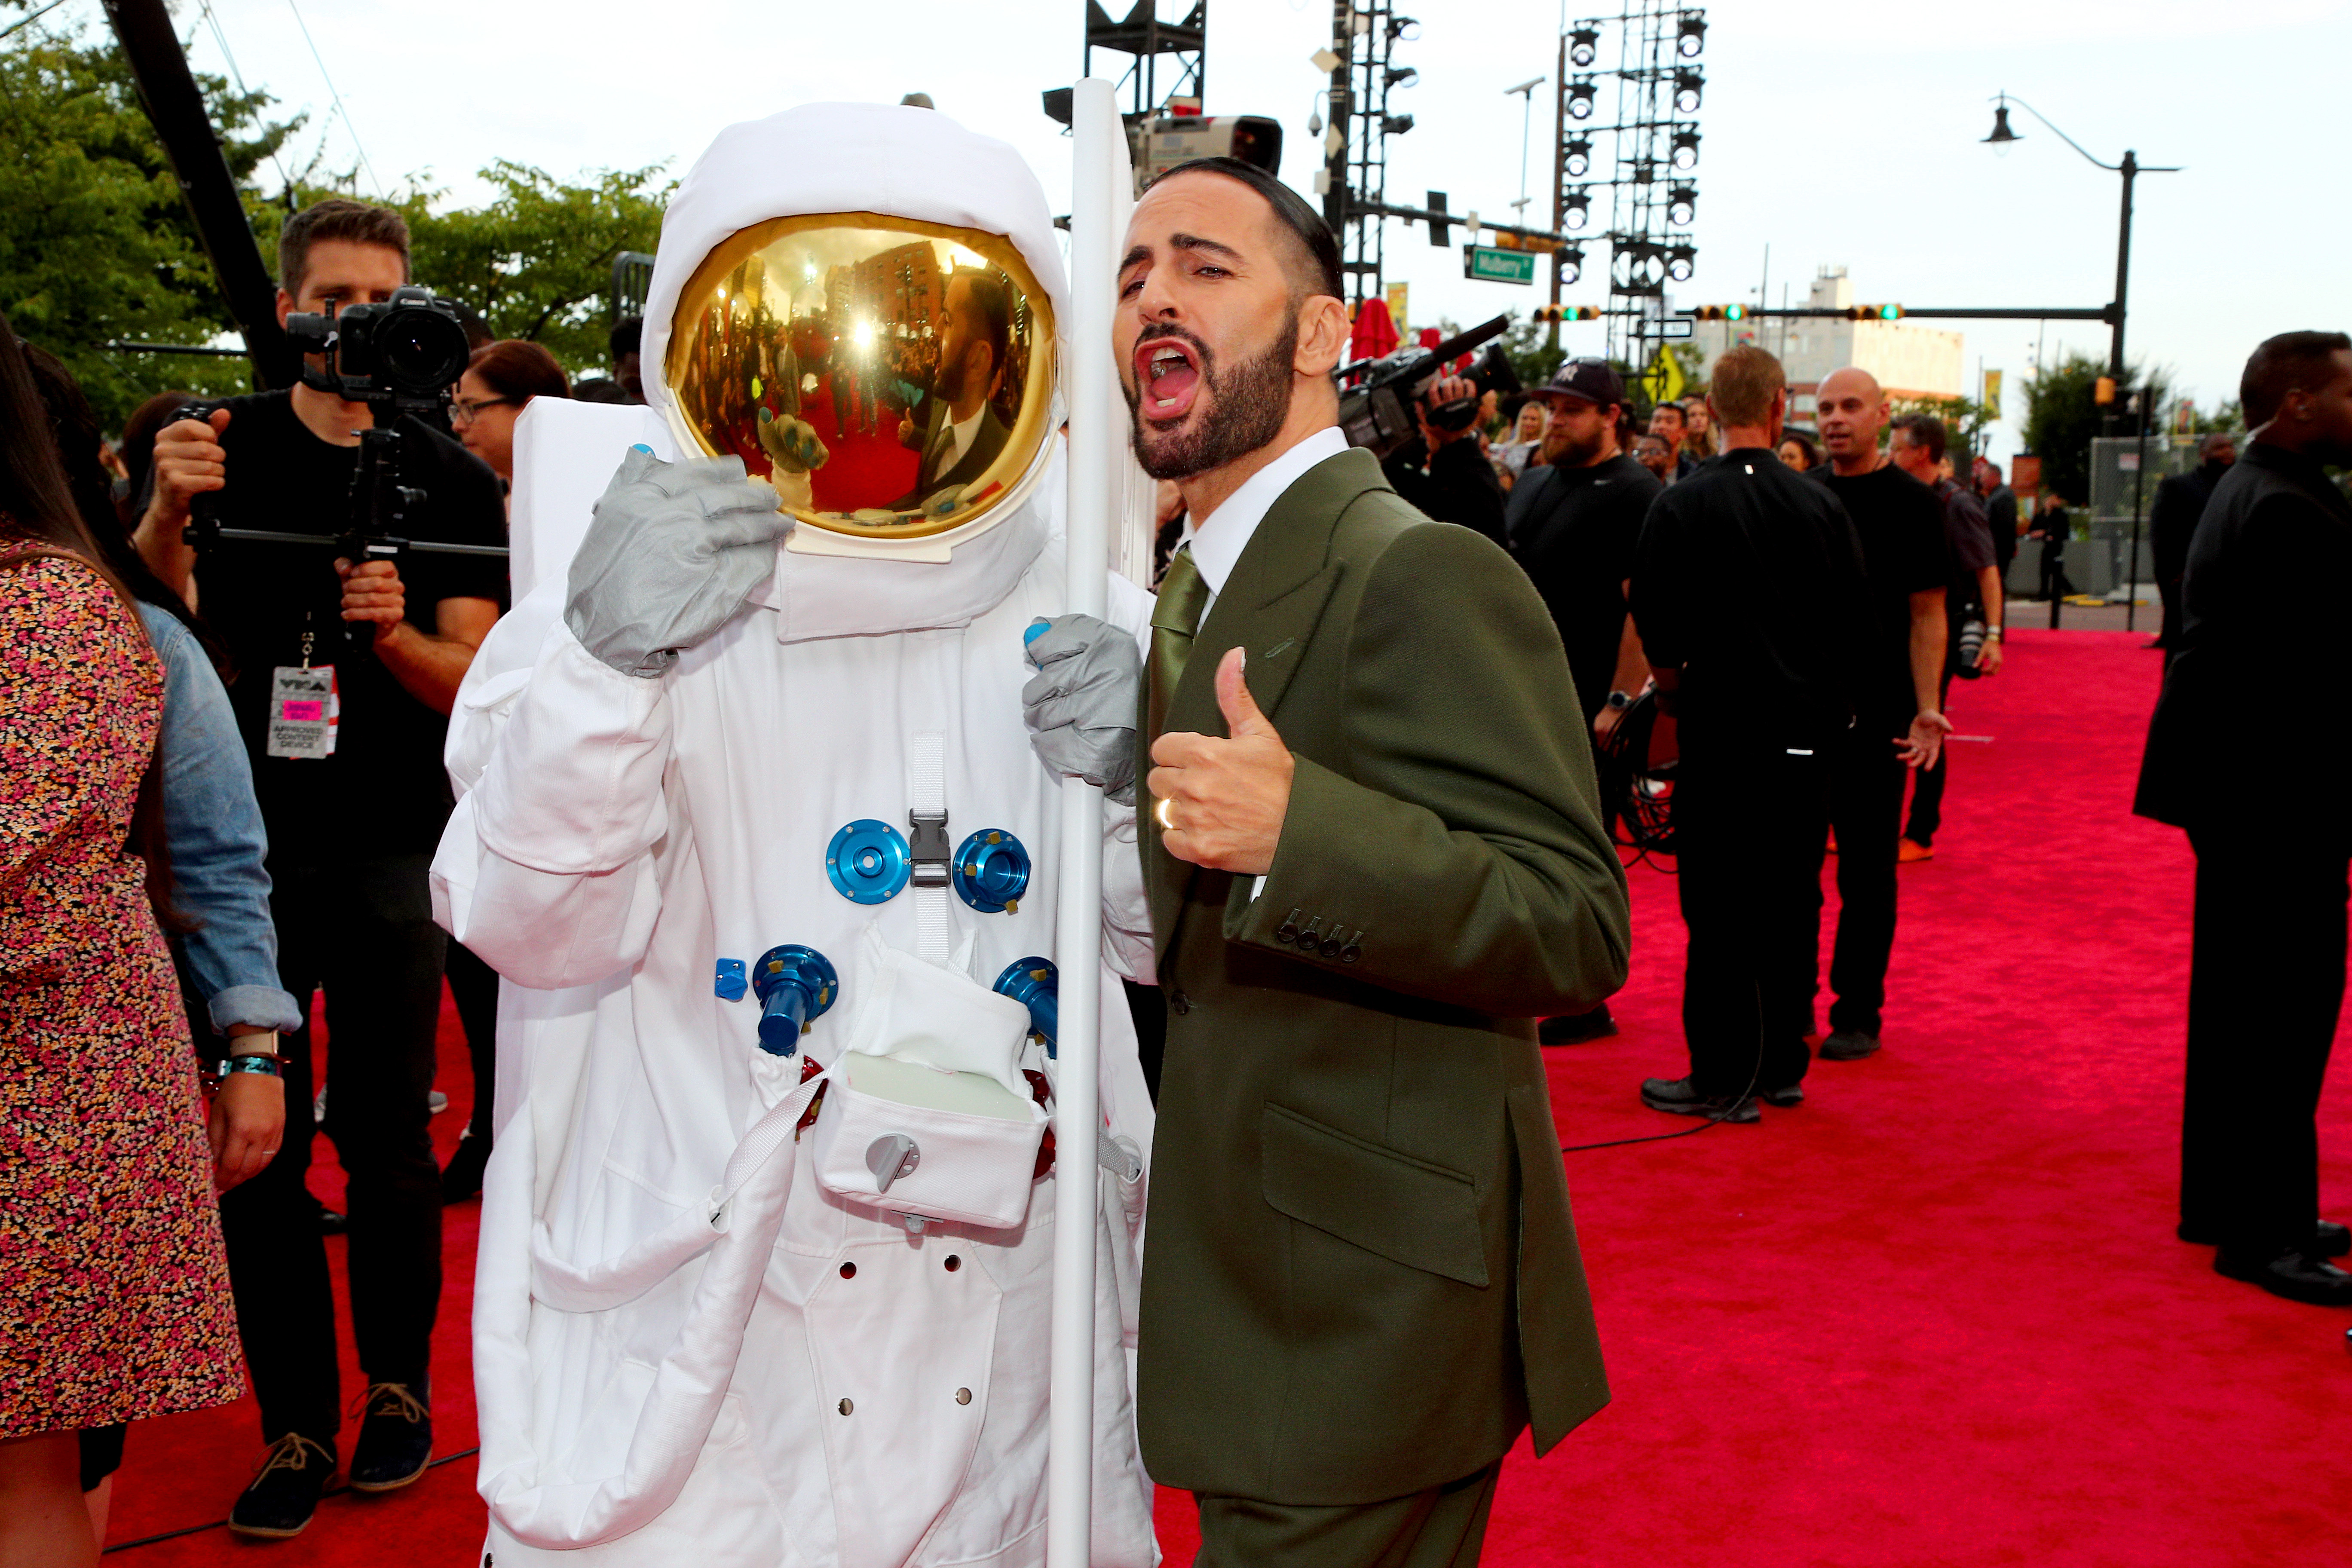 MTV's moon man and fashion designer Marc Jacobs attend the 2019 MTV Video Music Awards at Prudential Center on Aug. 26, 2019 in Newark, New Jersey. 